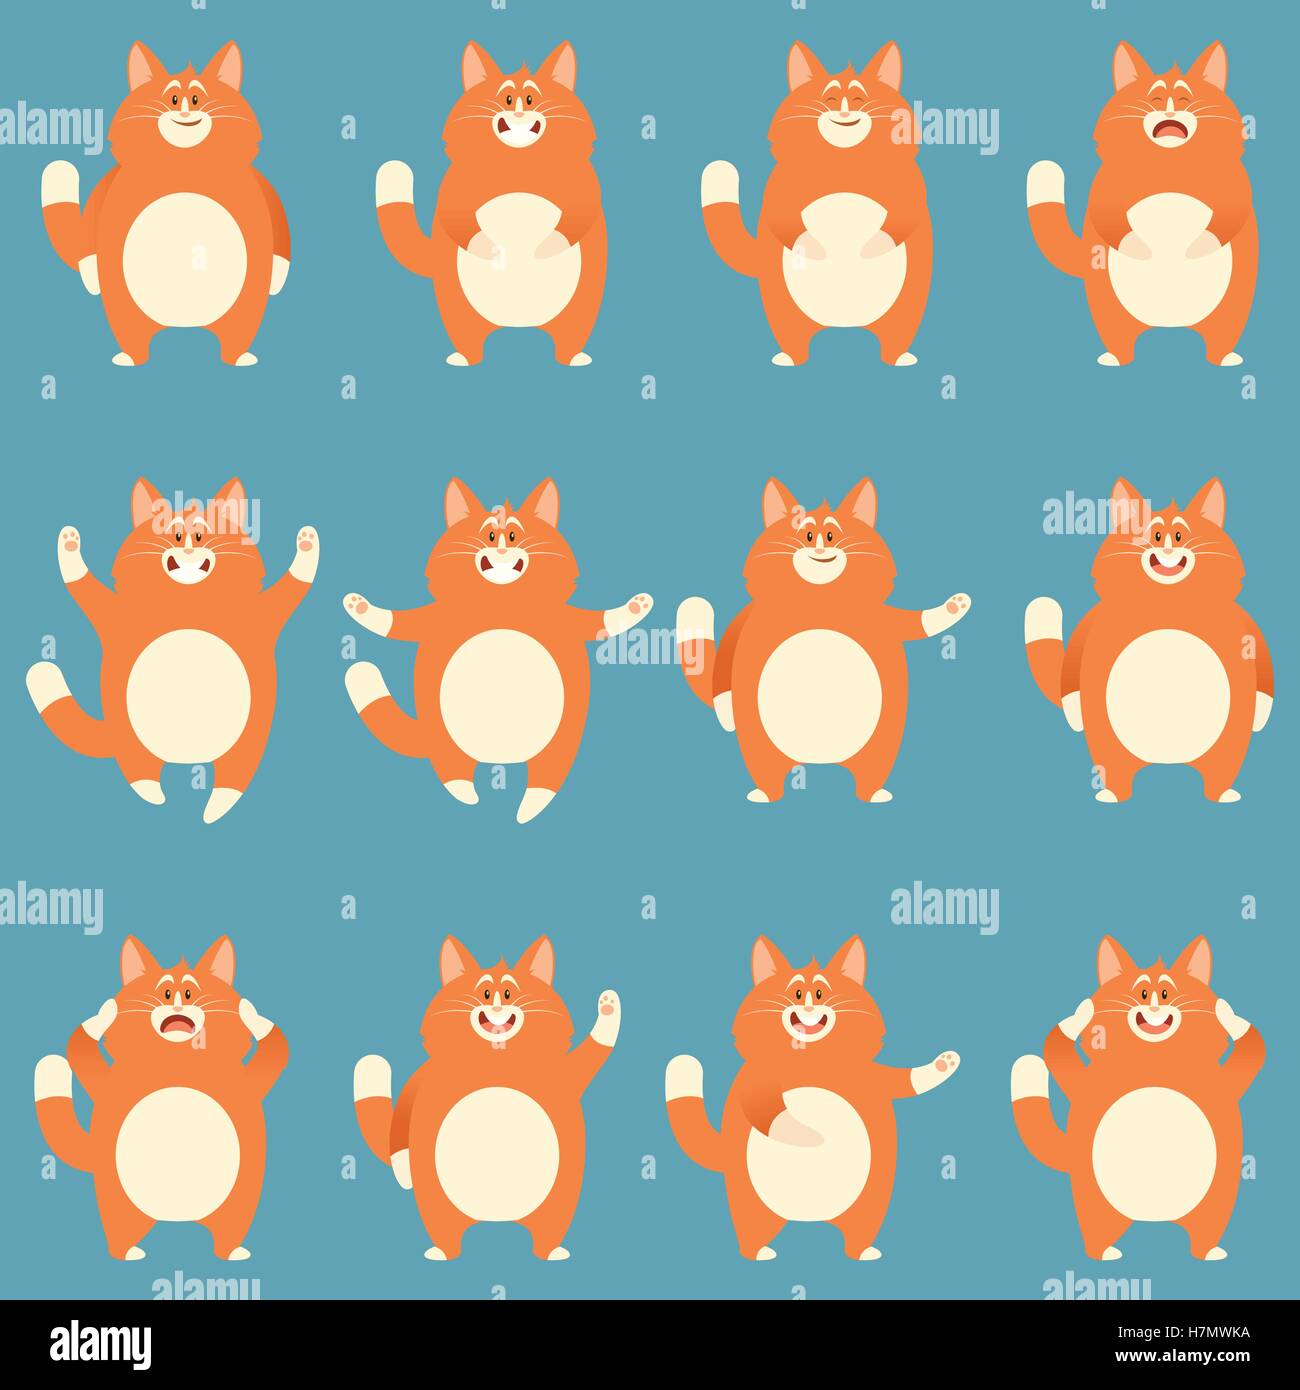 Vector image of the Set of flat red cat icons Stock Vector